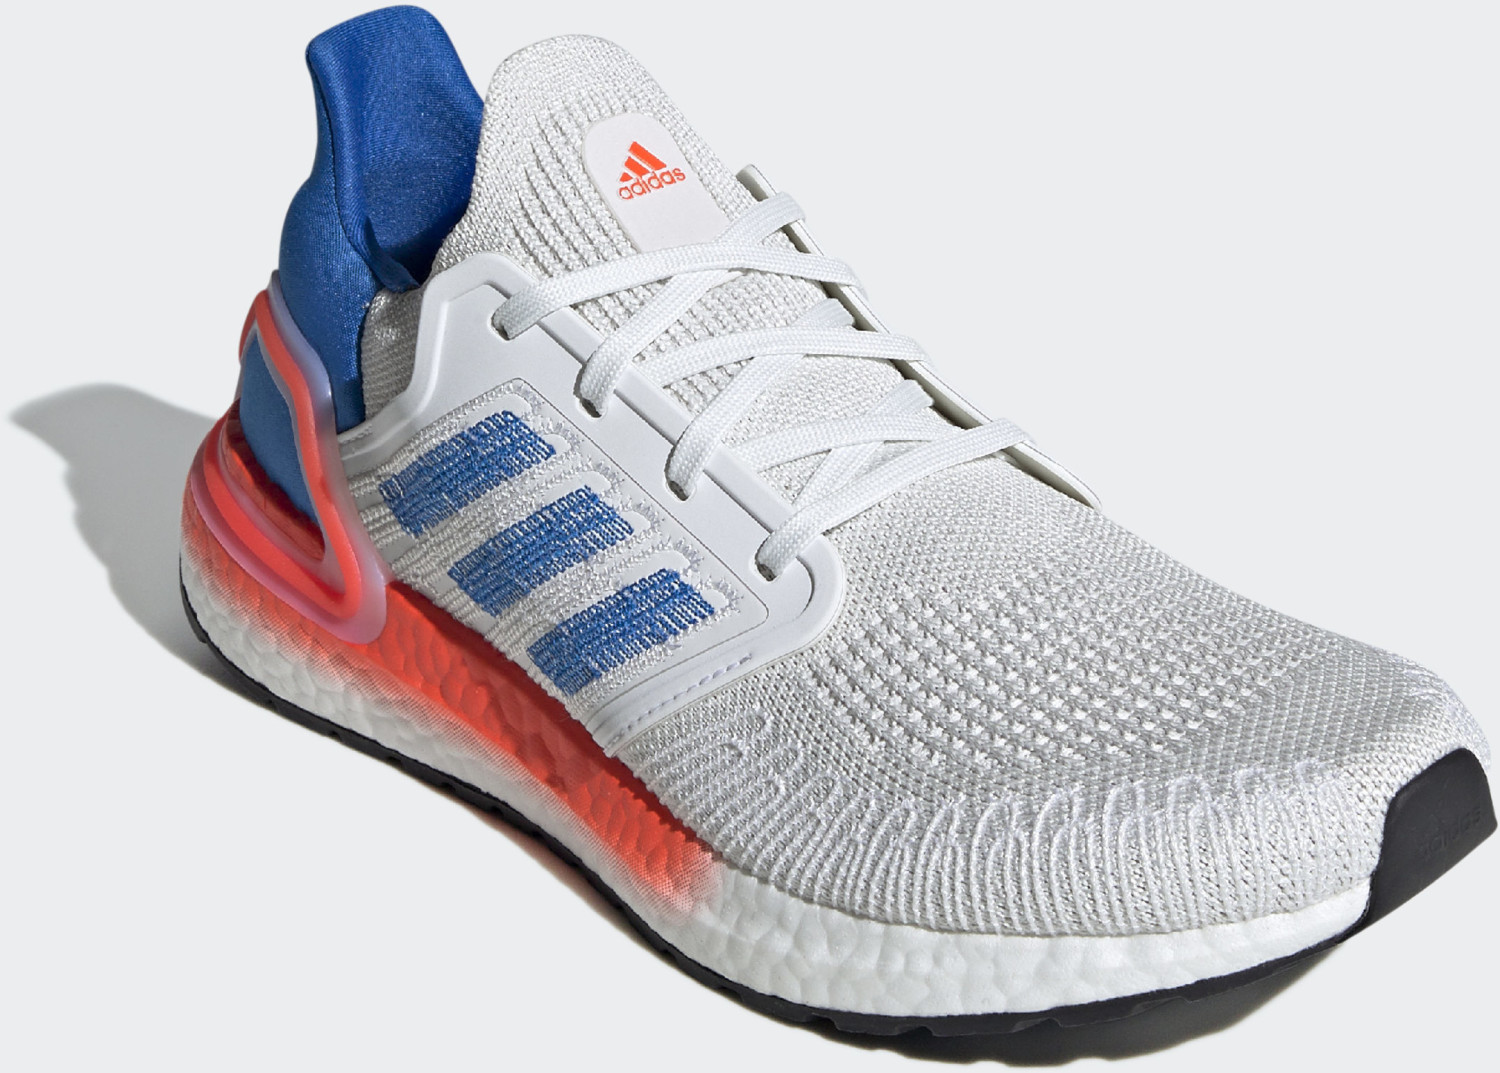 Adidas Ultraboost 20 crystal white/glow blue/solar red desde 177,12